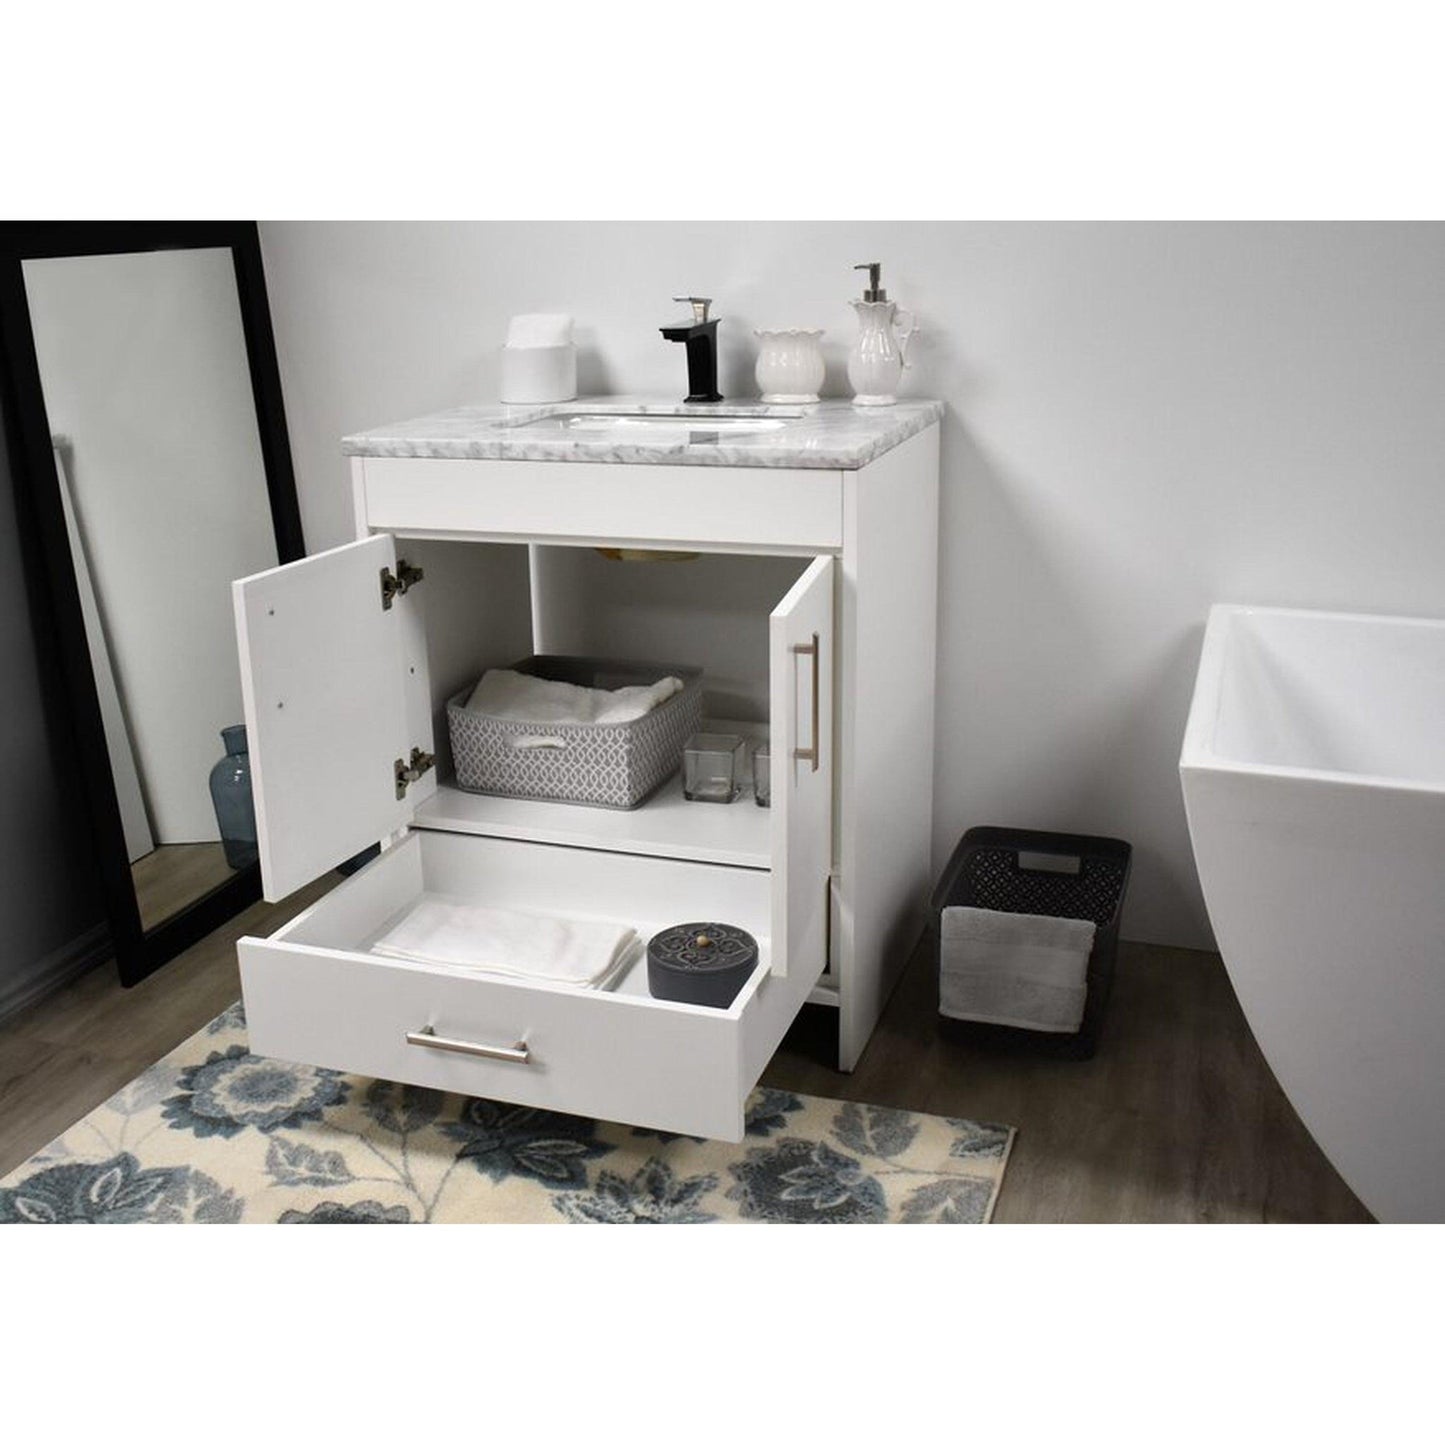 Volpa USA Capri 24" x 22" White Freestanding Modern Bathroom Vanity With Preinstalled Undermount Sink And Carrara Marble top With Brushed Nickel Edge Handles